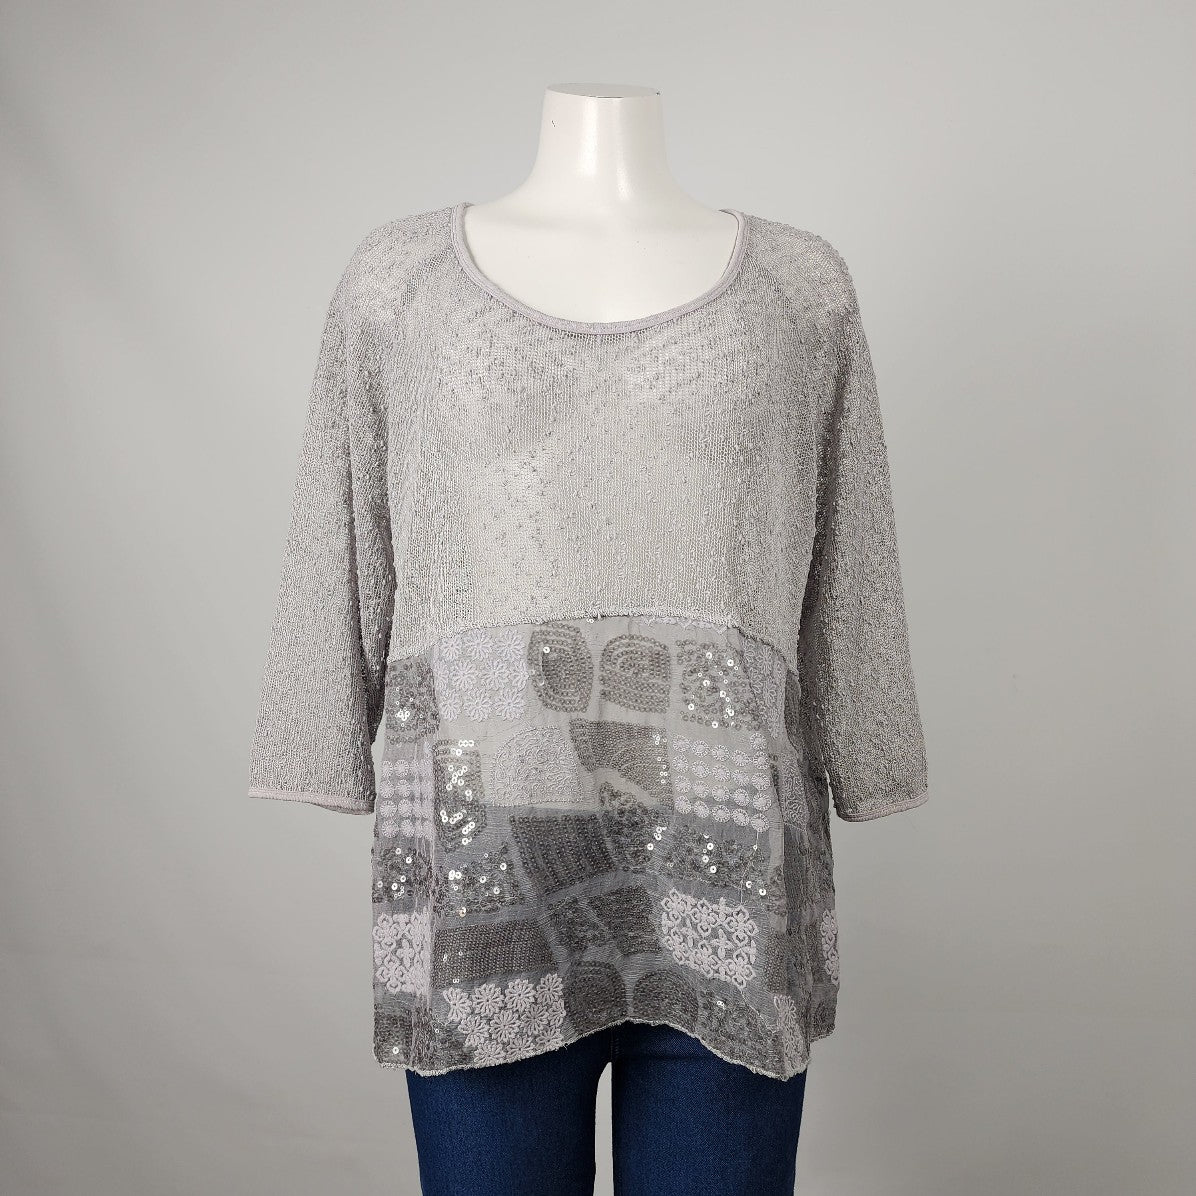 Danny Be Grey Knit Sequin Top Size XL